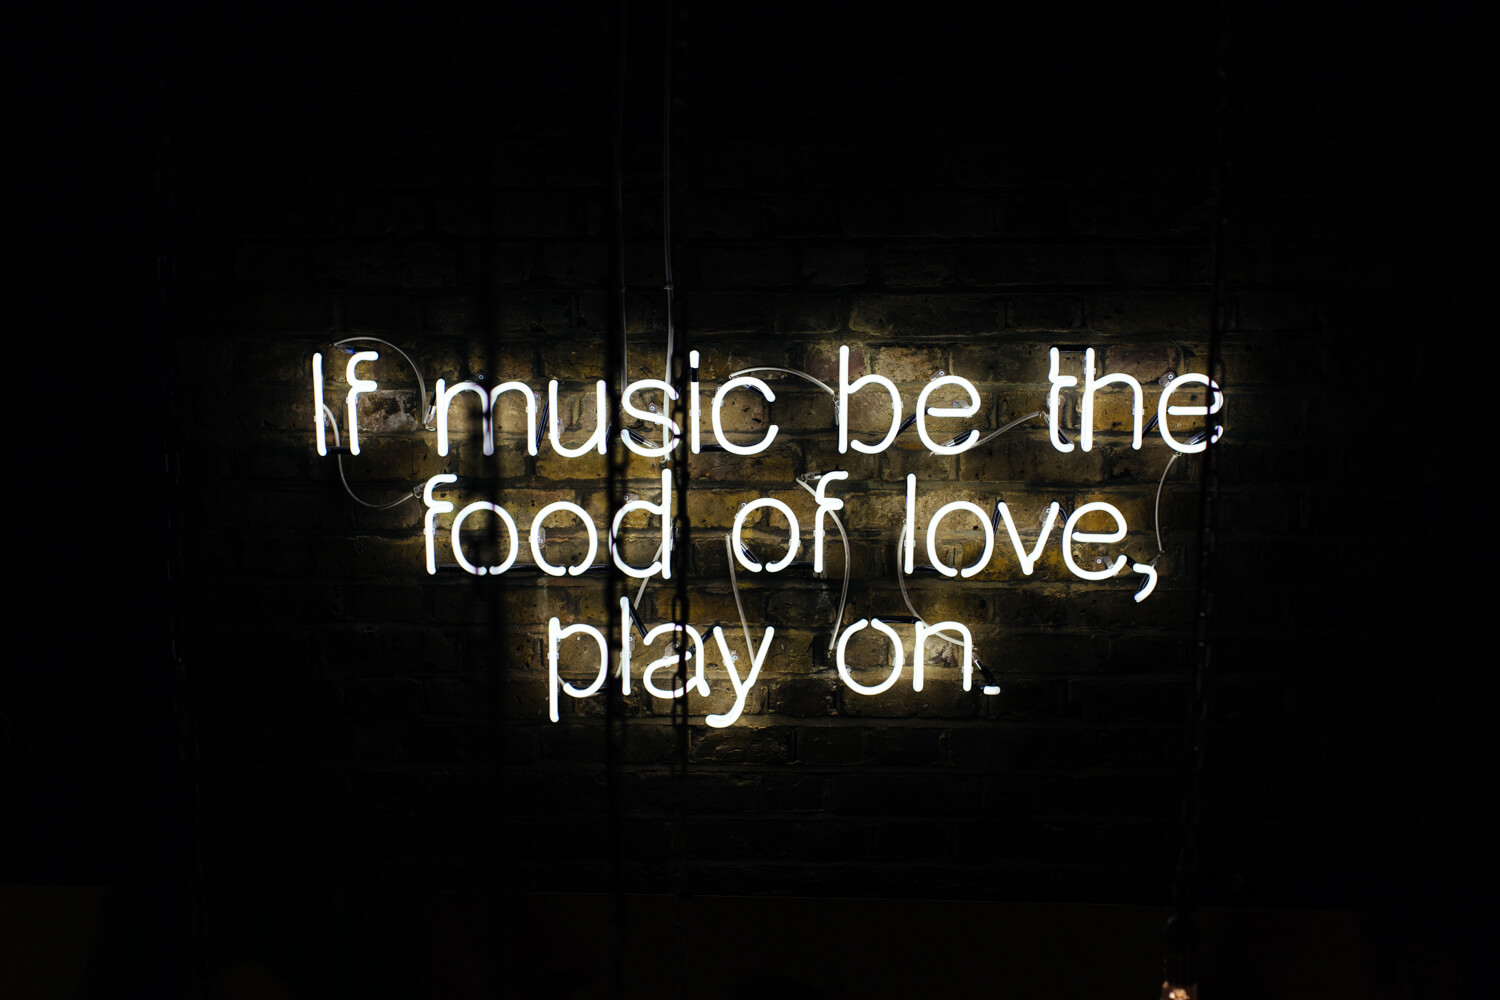 If music be the food of love, play on.